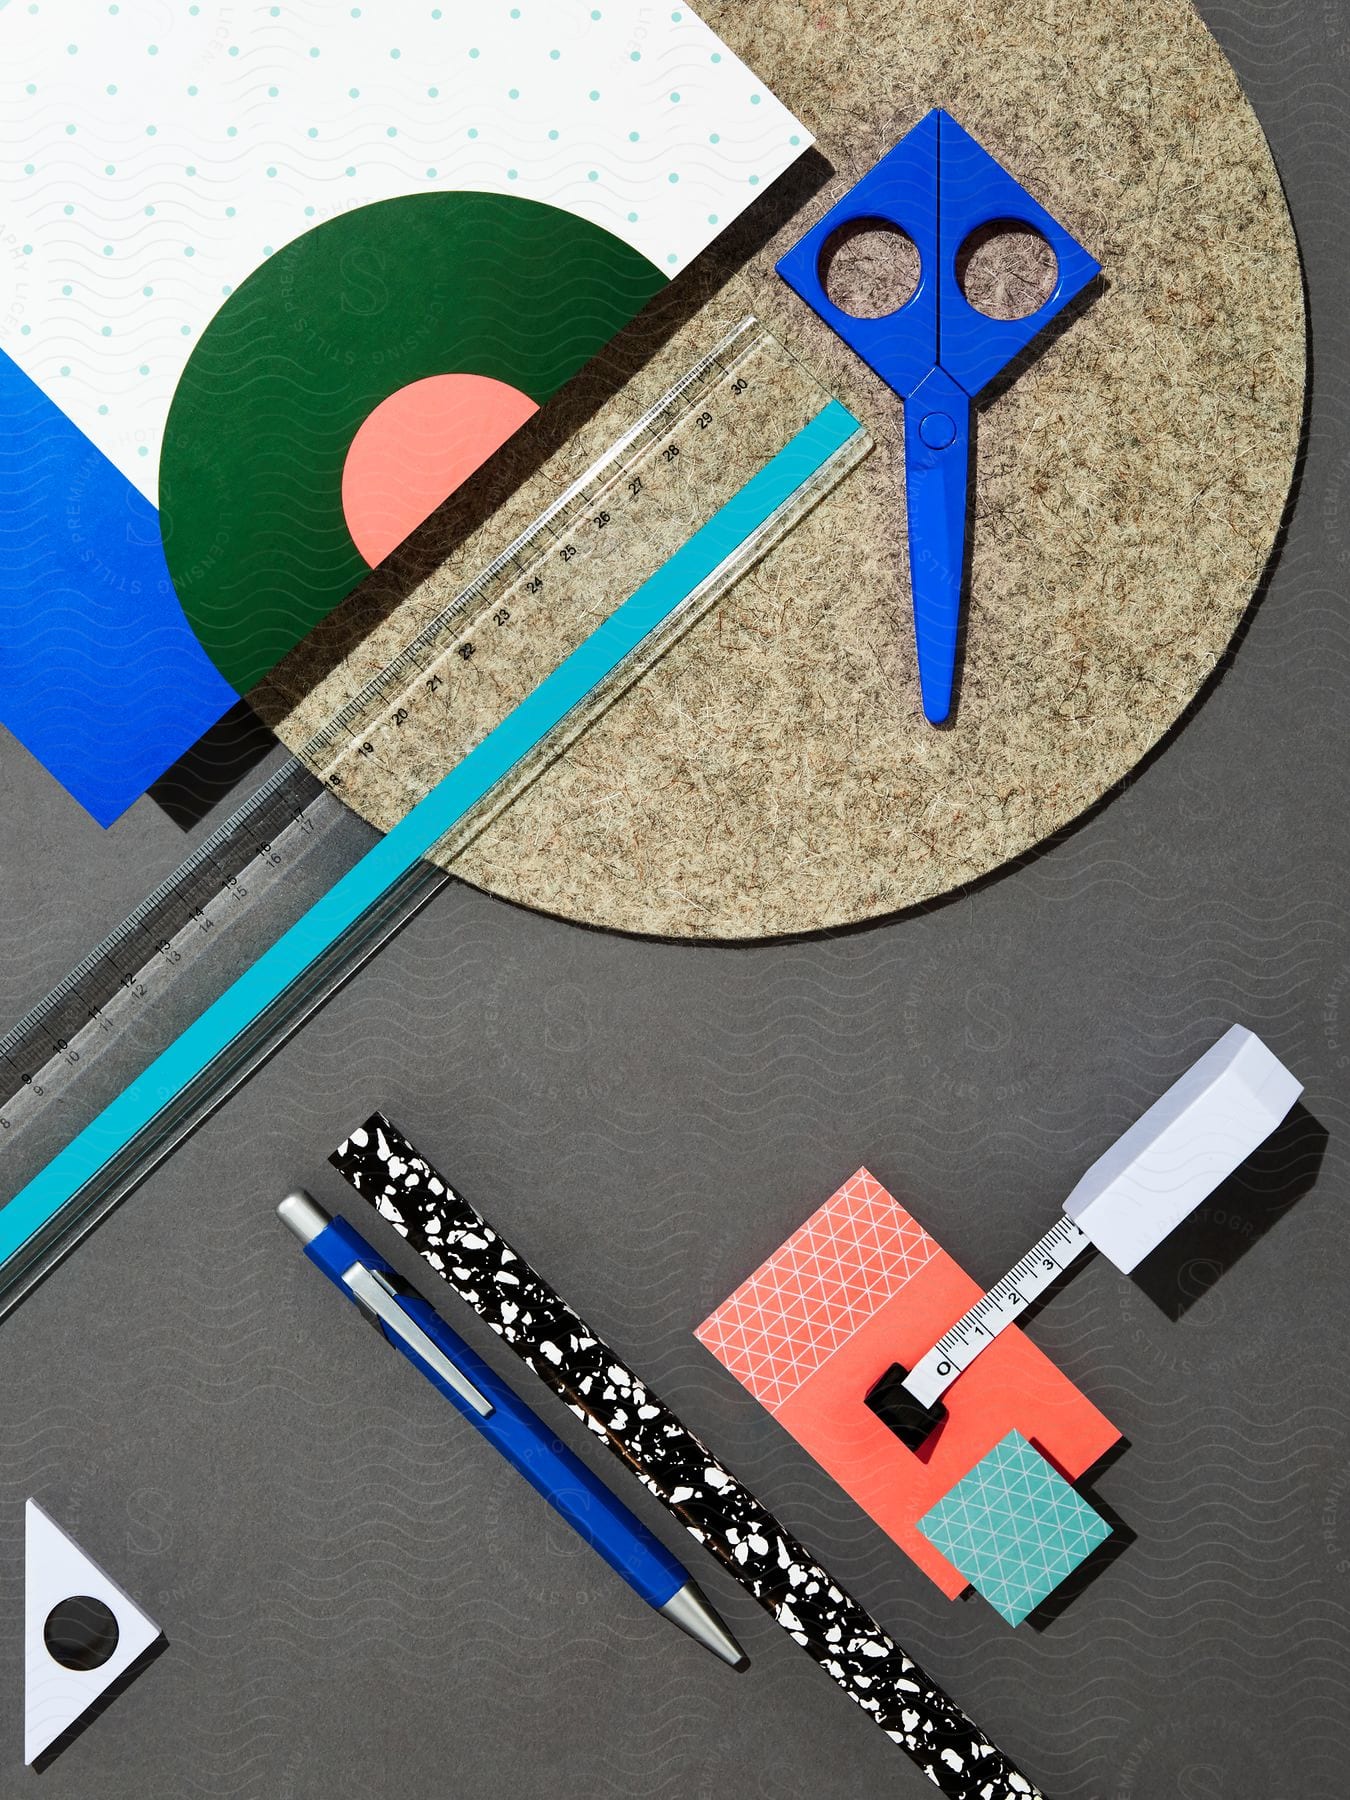 An artistic and colorful still life of rulers scissors and drafting tools